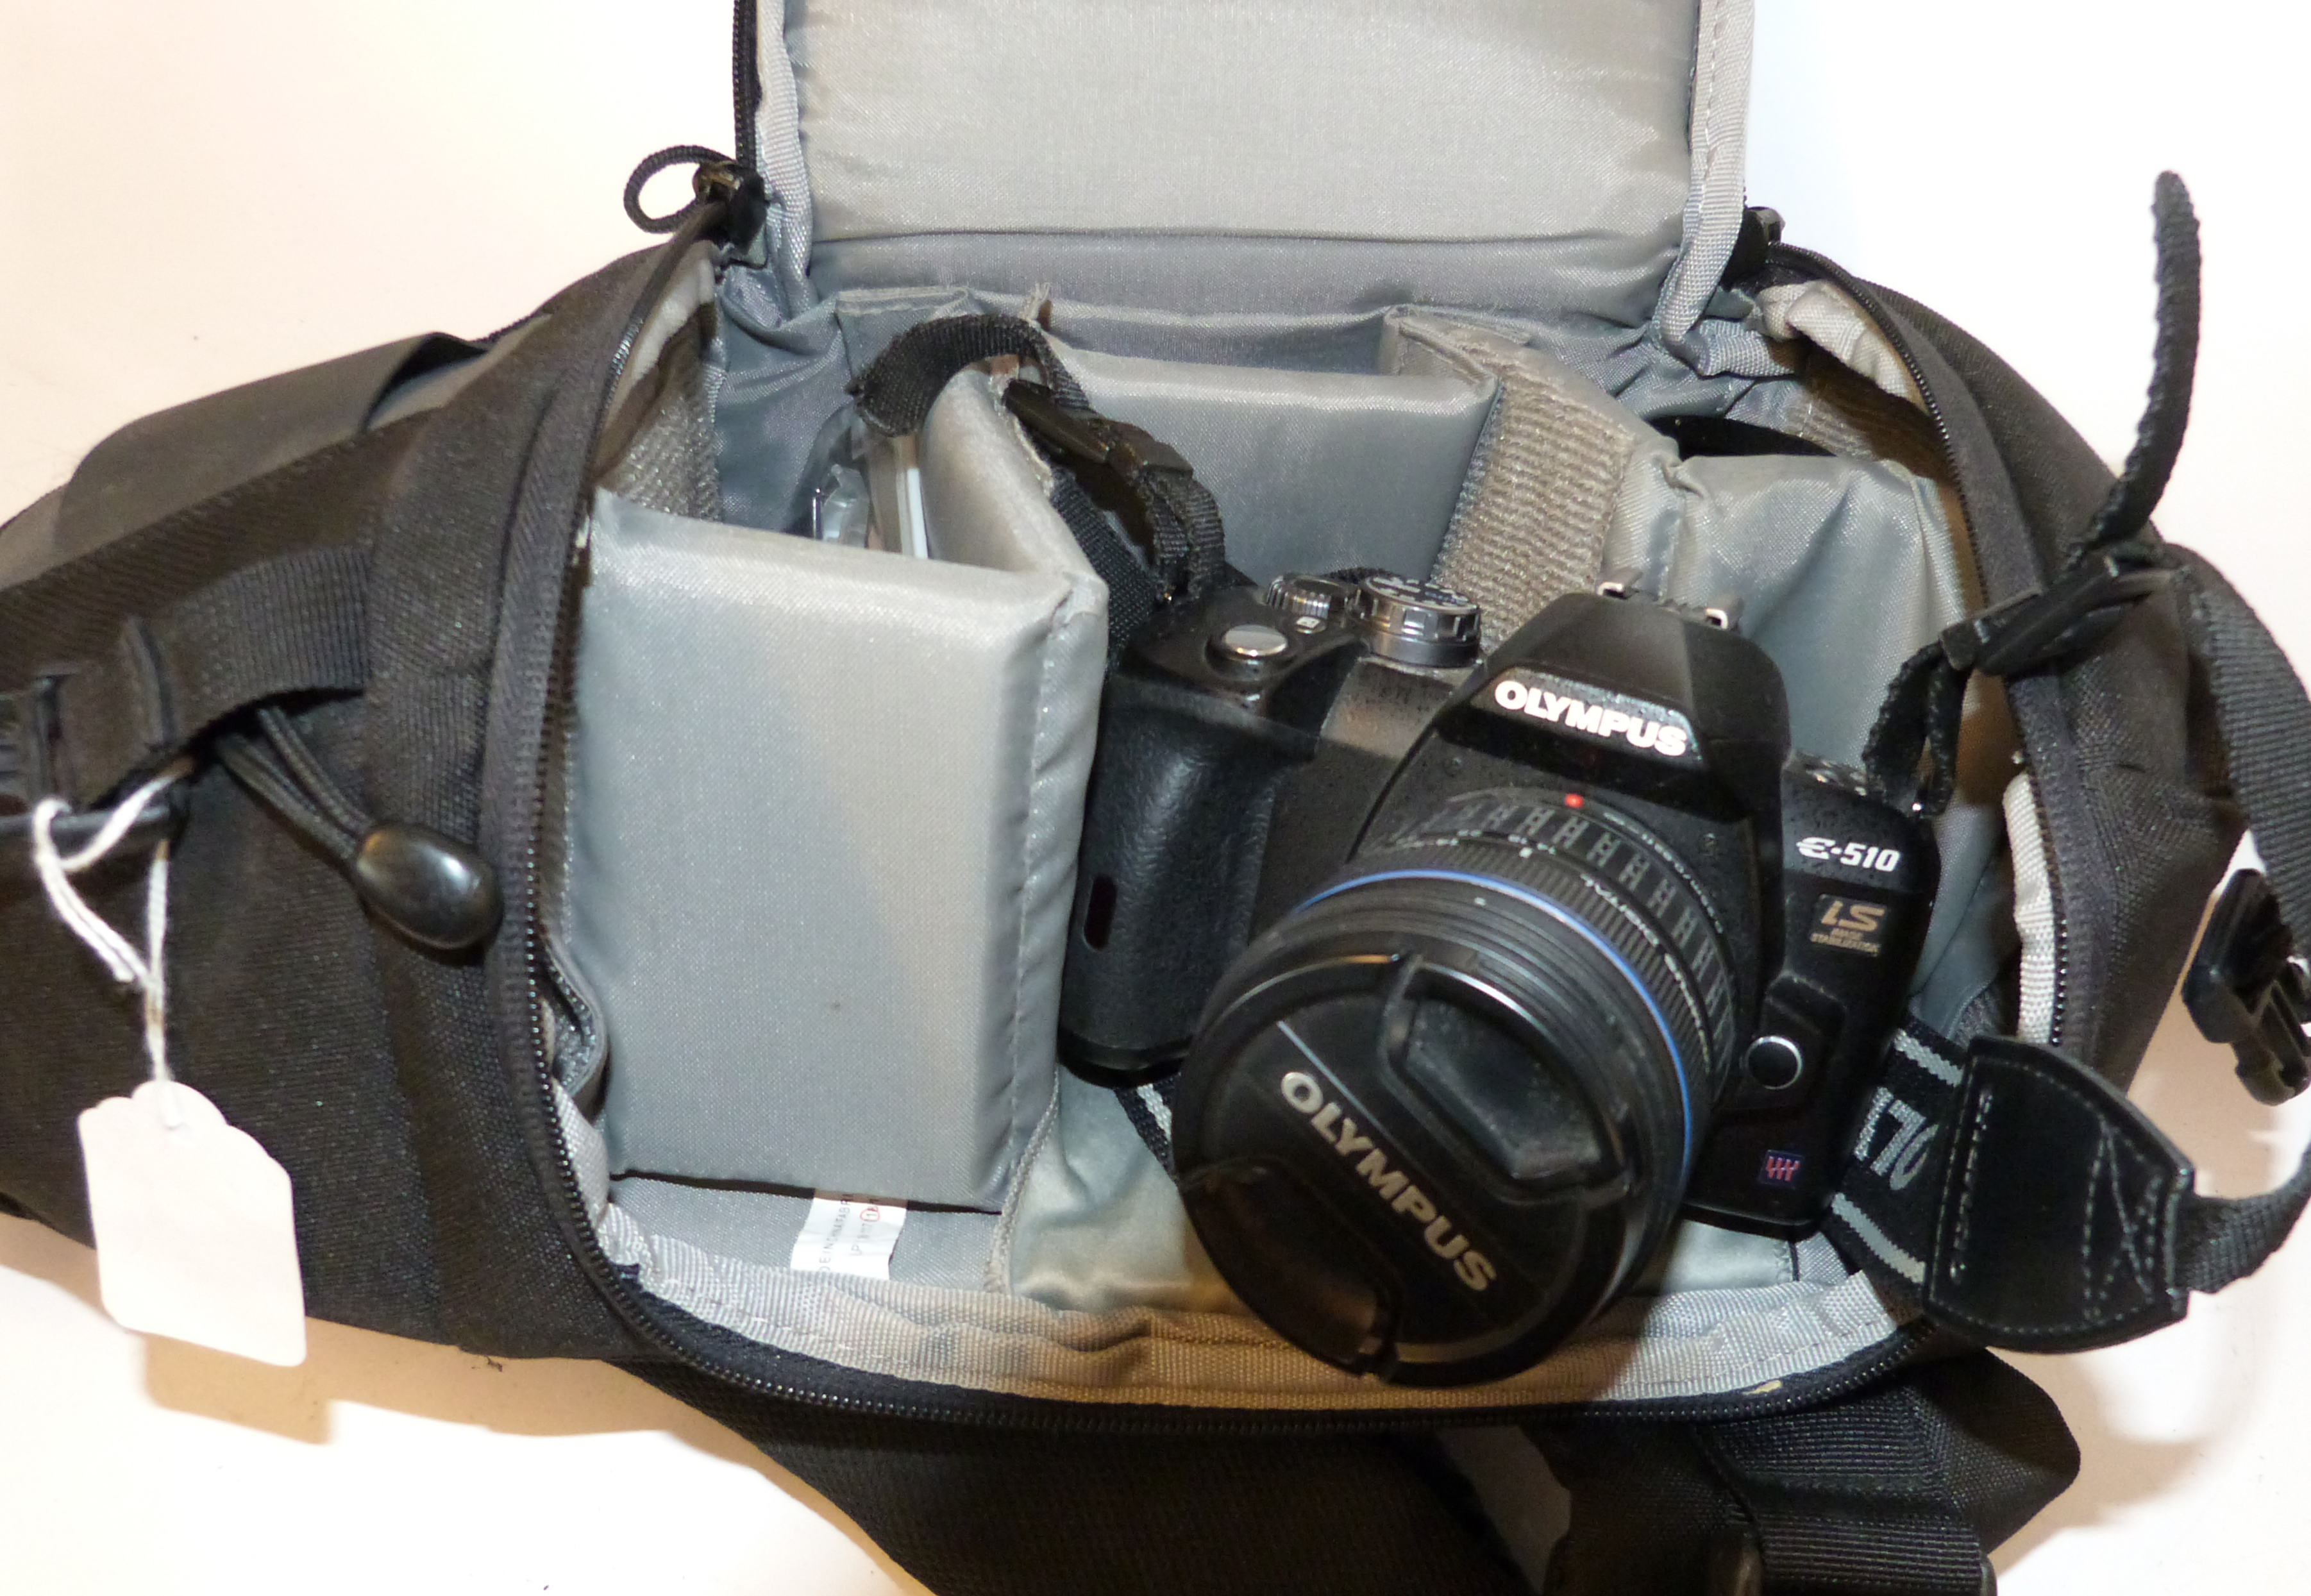 Olympus E-510 digital camera, together with Zuiko digital 14-42mm lens, charger and fitted case - Image 2 of 5